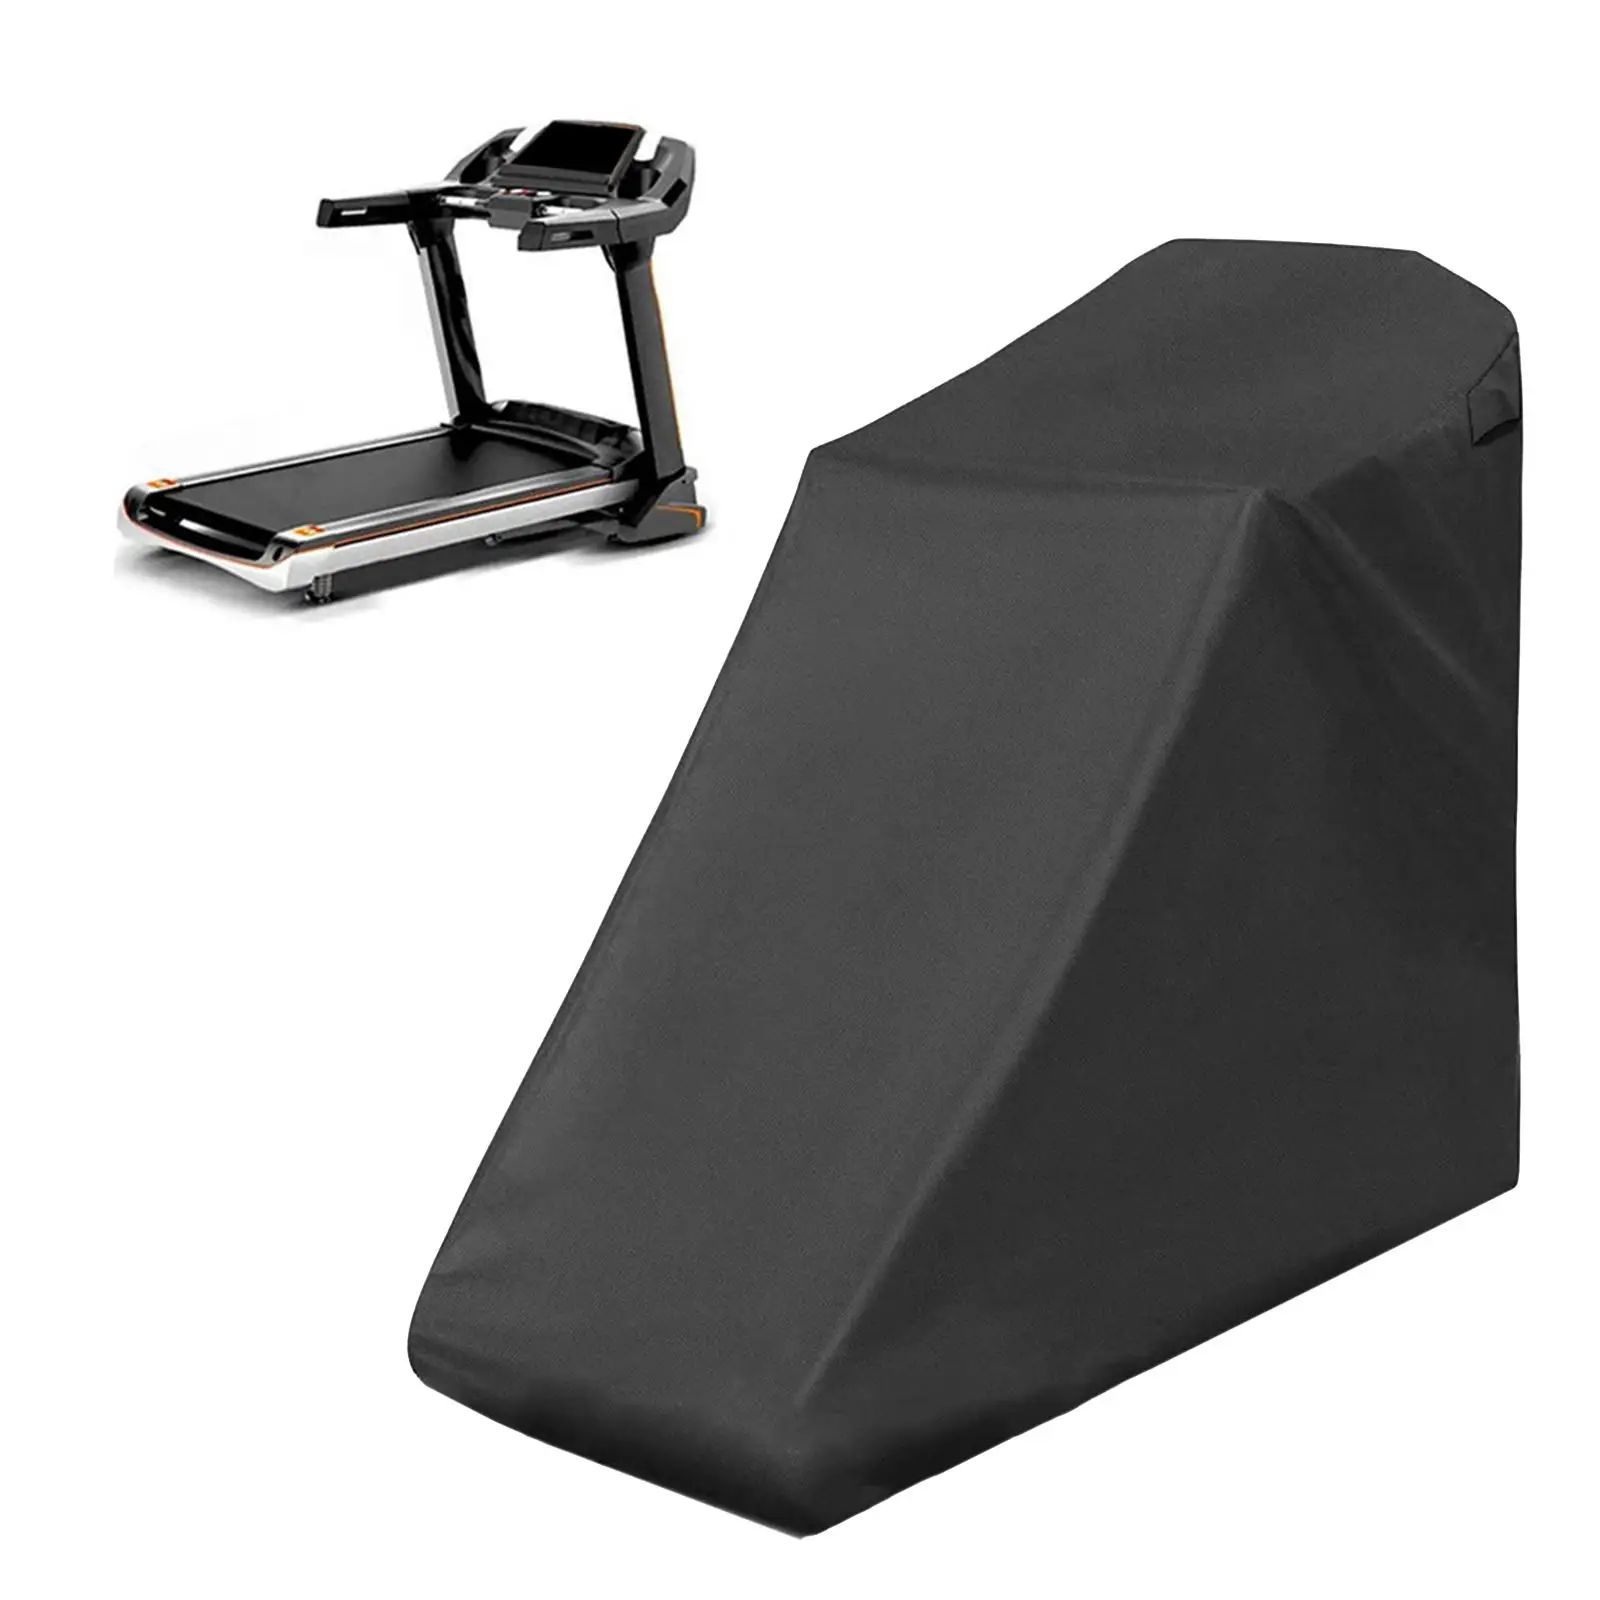 Treadmill Cover Running Machine Dustcover Exercise Bike Cover Protective Oxford Cloth Waterproof Dust Covers for Indoor Home Gym